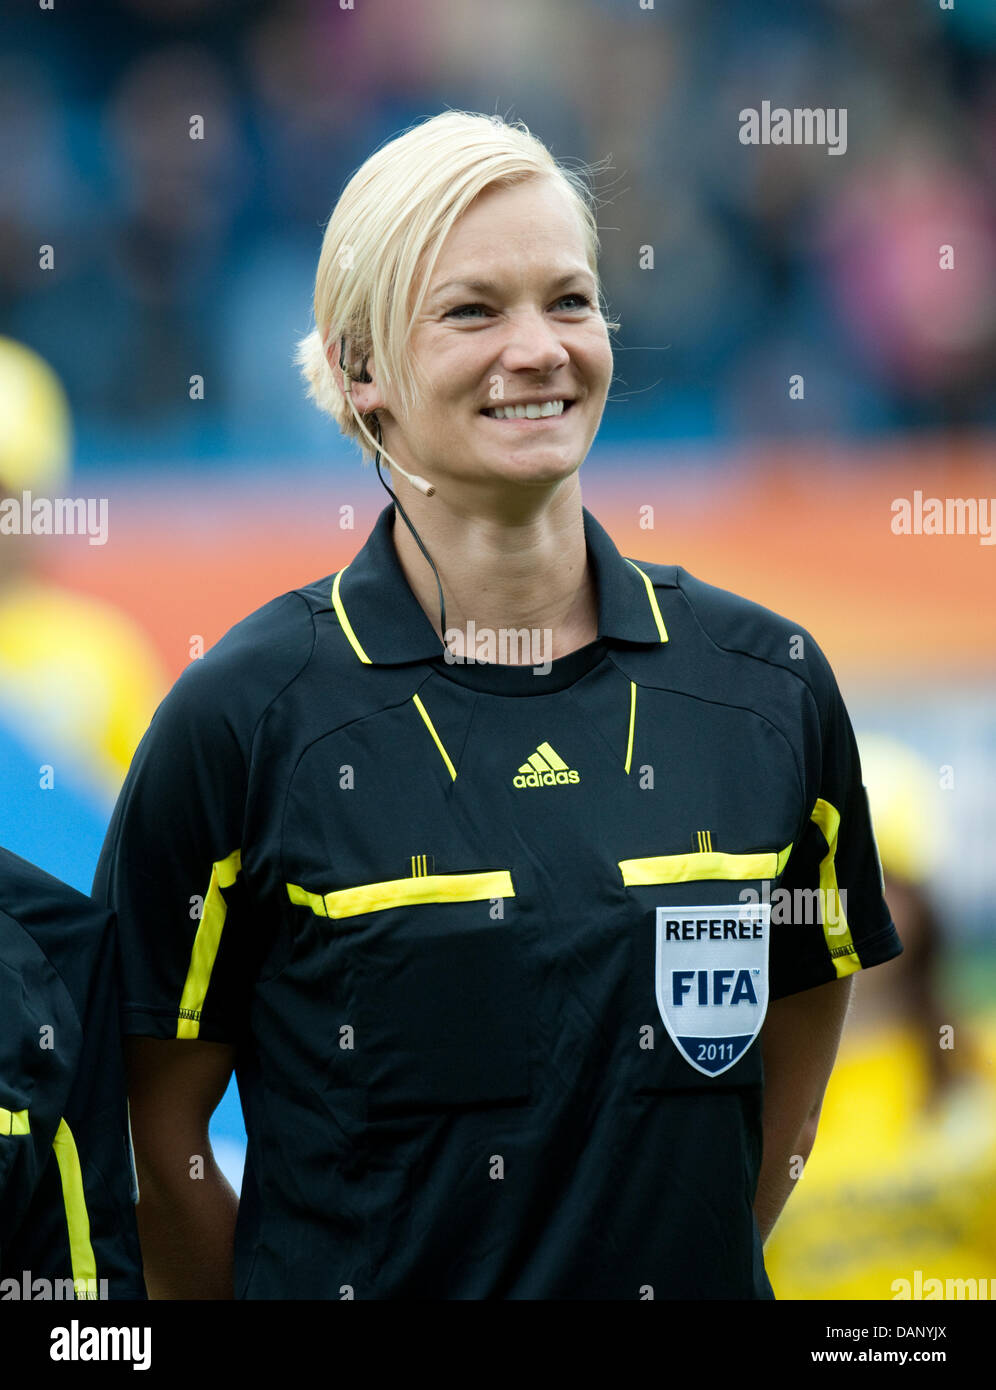 A file picture taken on 3 July 2011 shows soccer referee Bibiana Steinhaus during a FIFA Women's World Cup match of Australia versus Ecuatorial Guinea in Bochum, Germany. Steinhaus will be referee in the finale of the world cup on 15 July 2011. The German soccer union's head of the referee commission, Fandel, stated that the DFB was proud and happy about the nomination. Steinhaus w Stock Photo